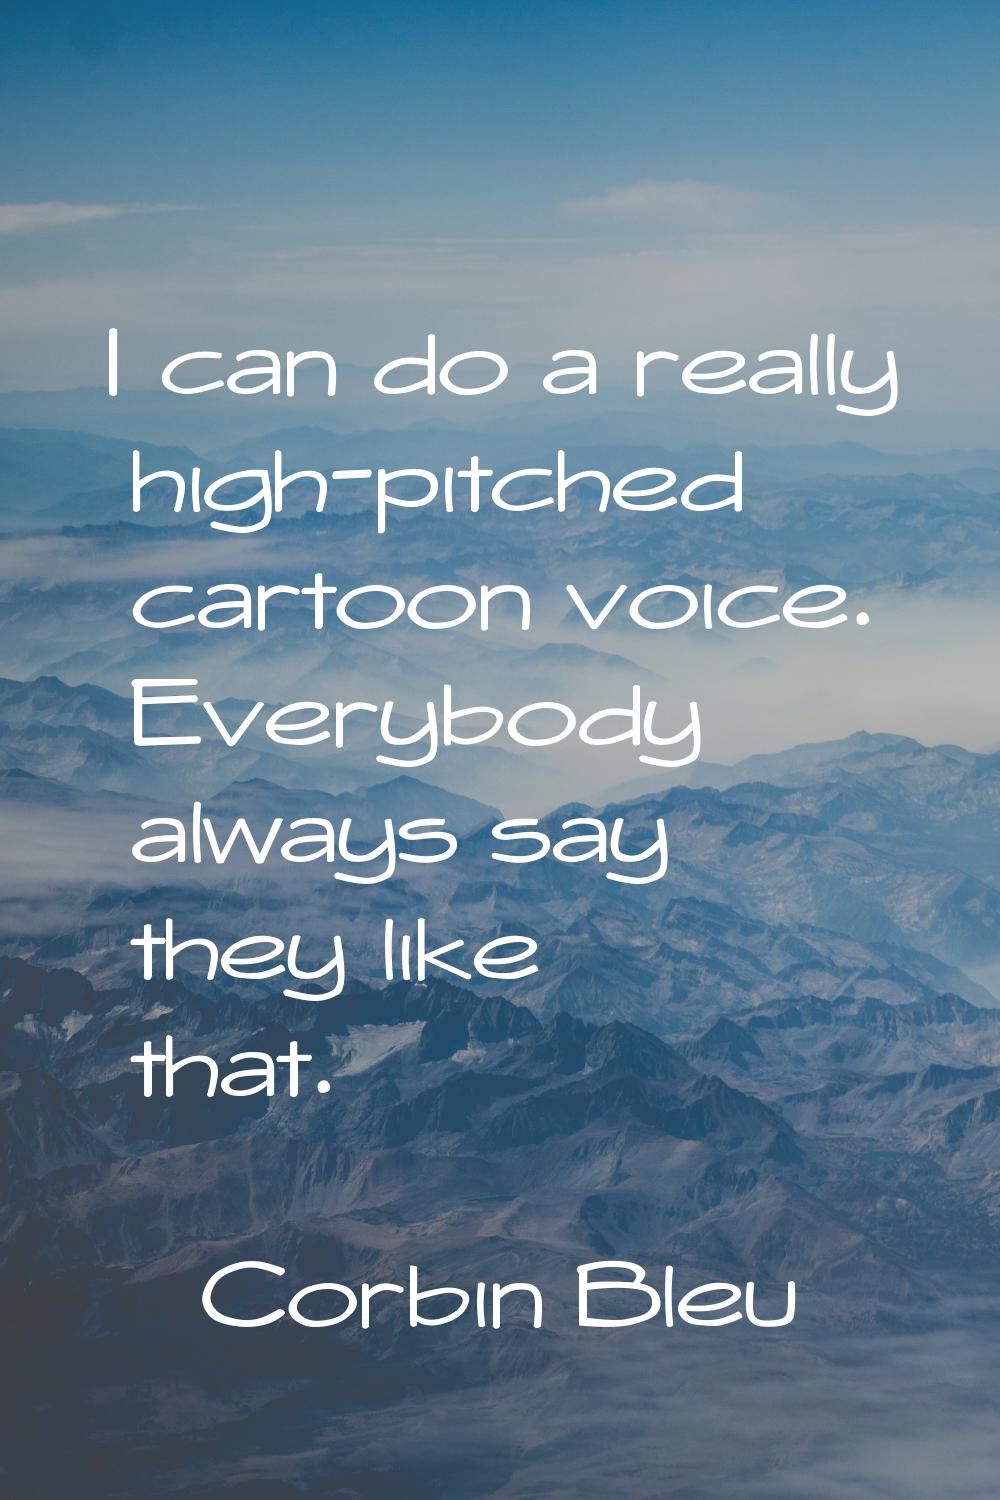 I can do a really high-pitched cartoon voice. Everybody always say they like that.